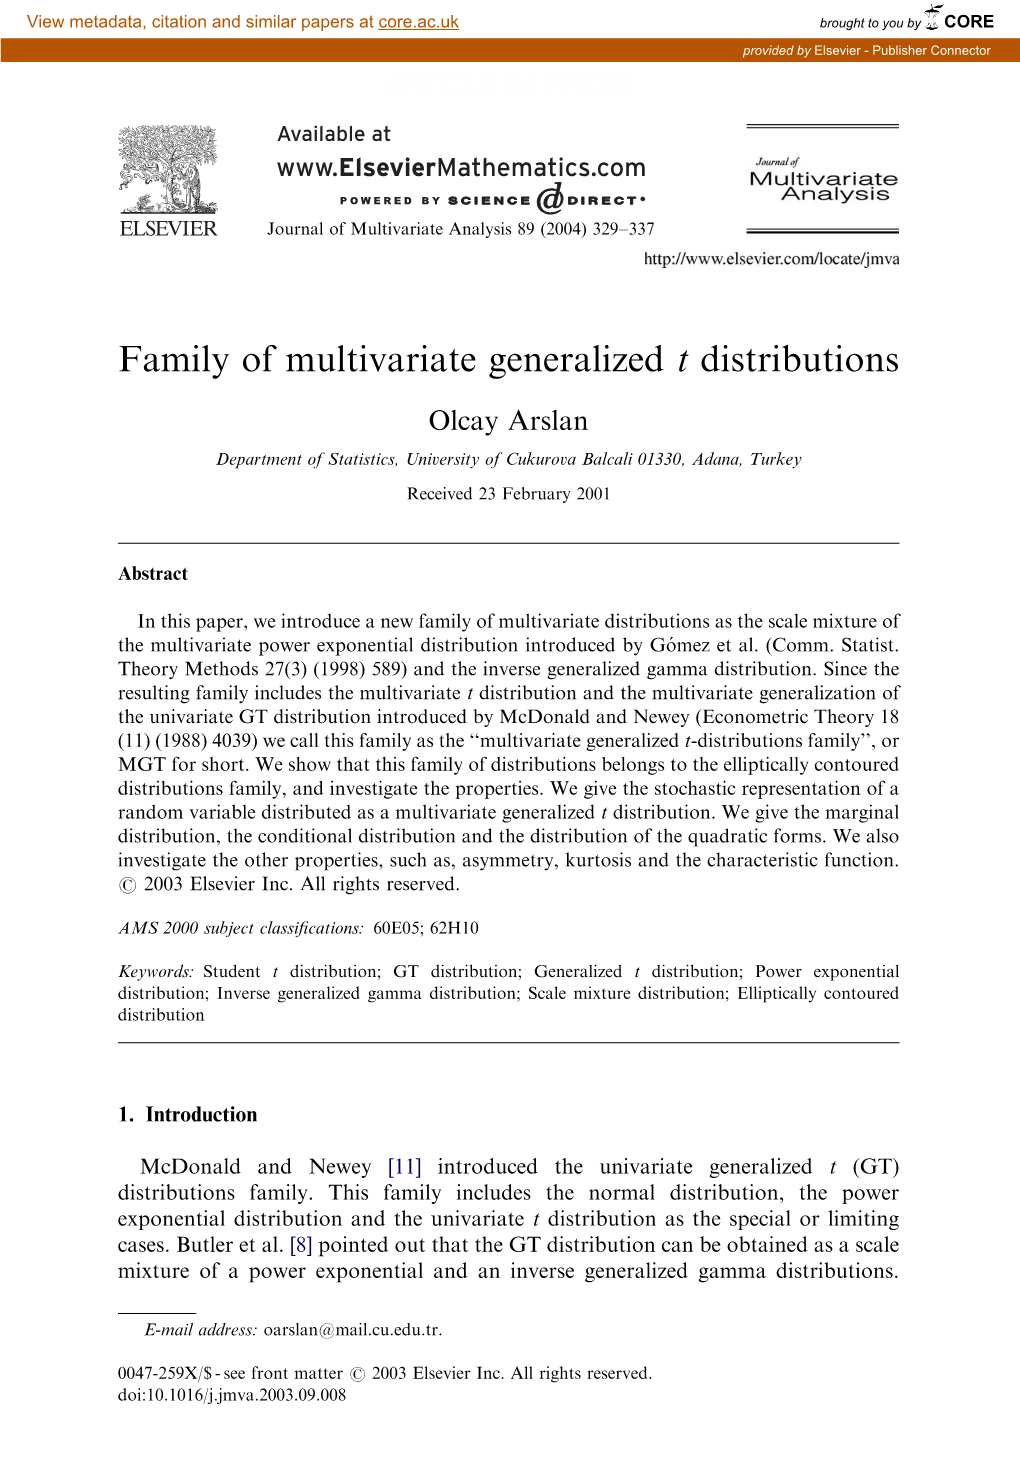 Family of Multivariate Generalized T Distributions